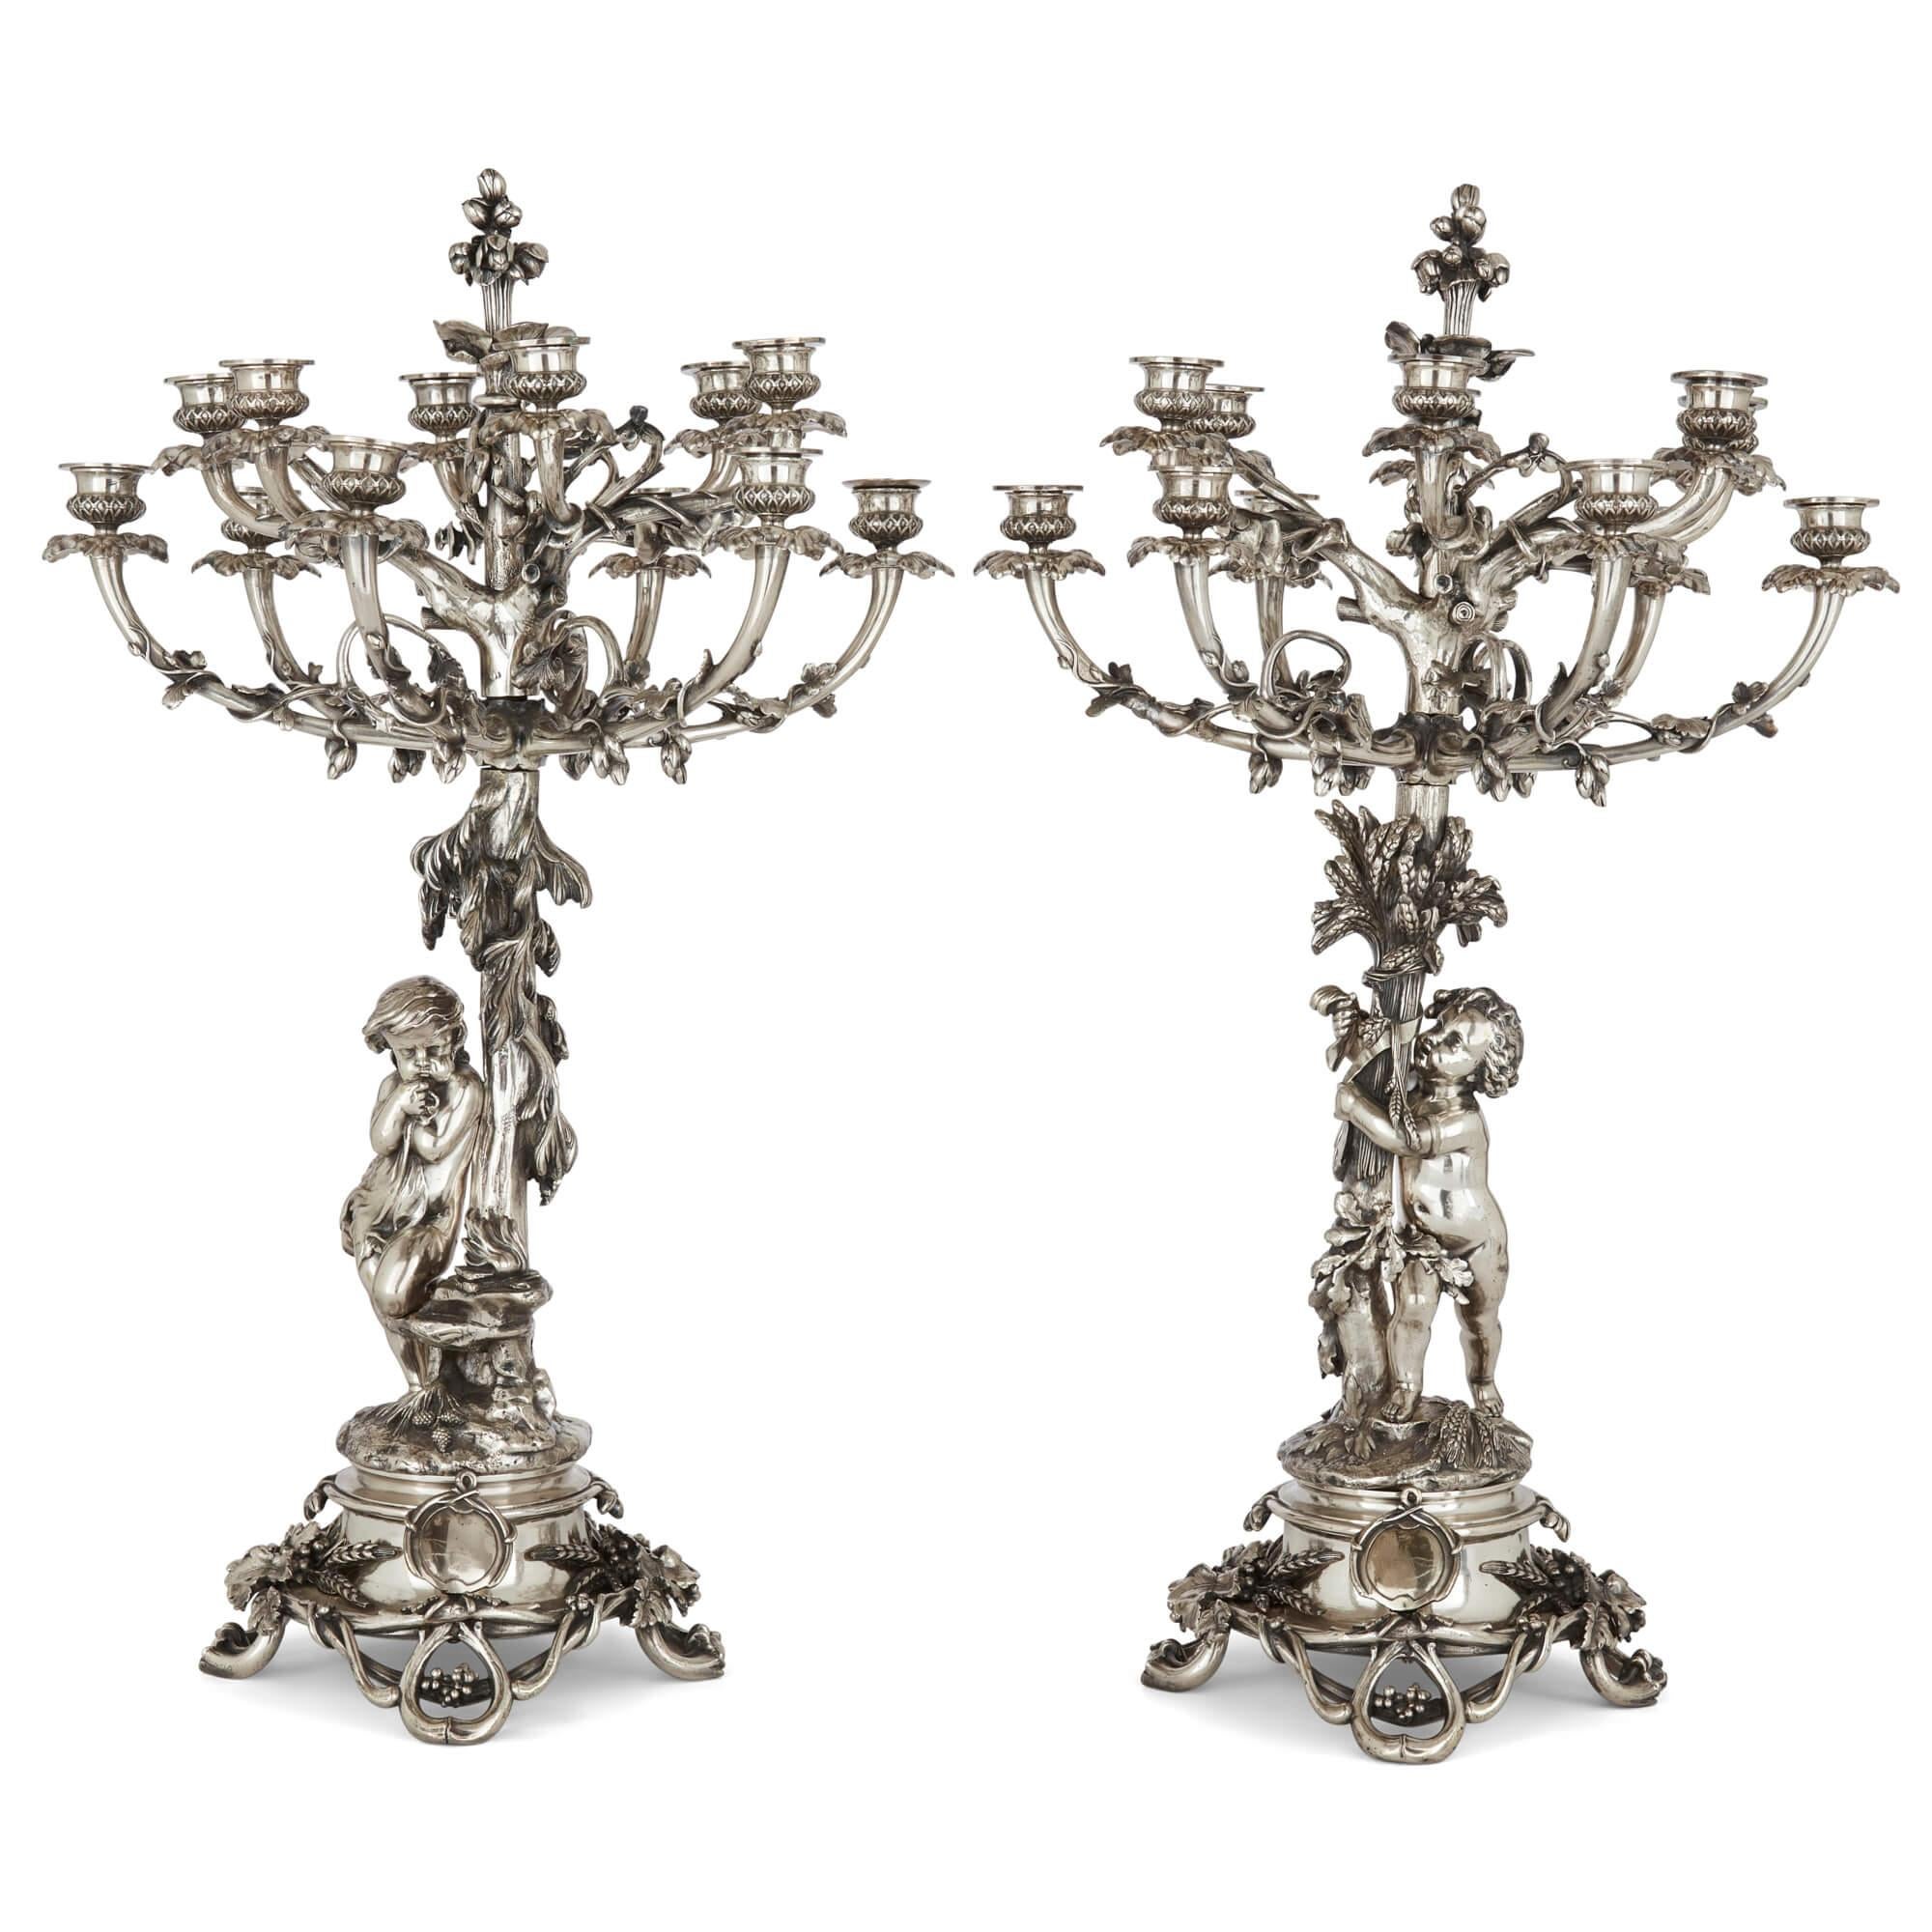 Pair of large silvered bronze candelabra by Christofle, 19th century
French, c. 1890
Height 71cm, diameter 42cm

This extraordinary decorative pair were made by the renowned Parisian firm Christofle, who are notable for introducing silver plating